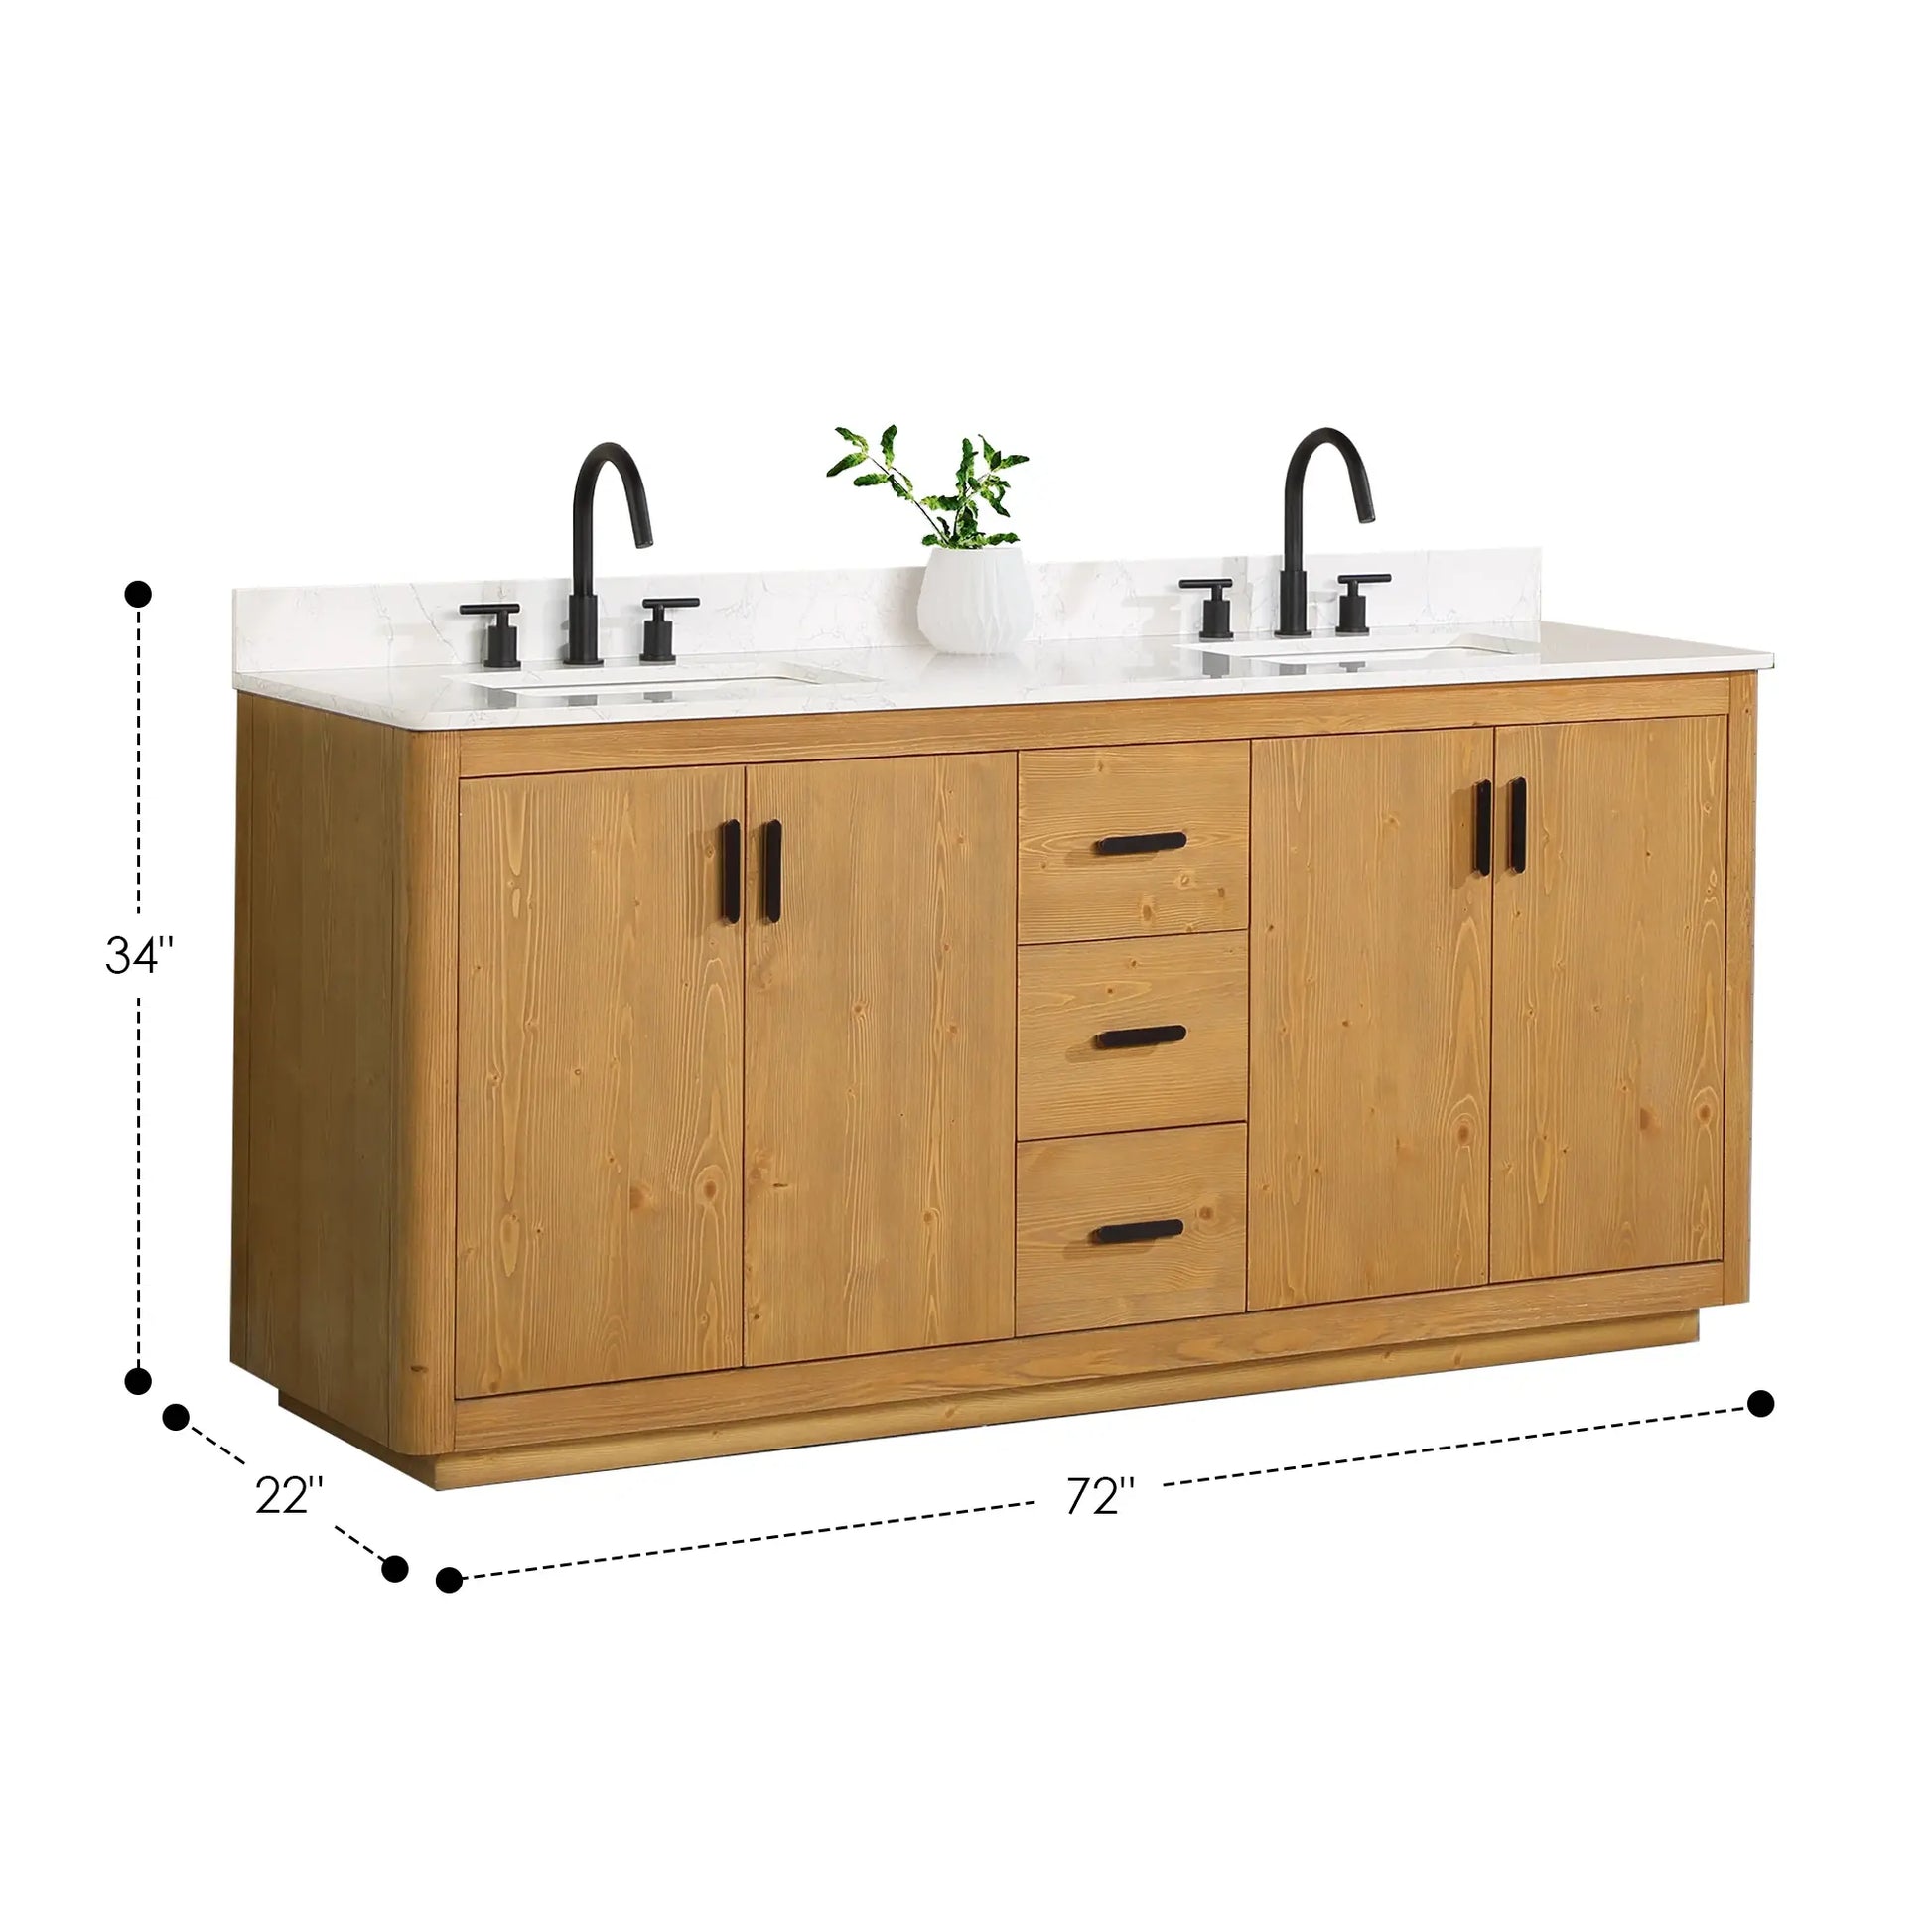 Altair Perla Double Bathroom Vanity in Natural Wood with Grain White Composite Stone Countertop and Optional Mirror - Sea & Stone Bath